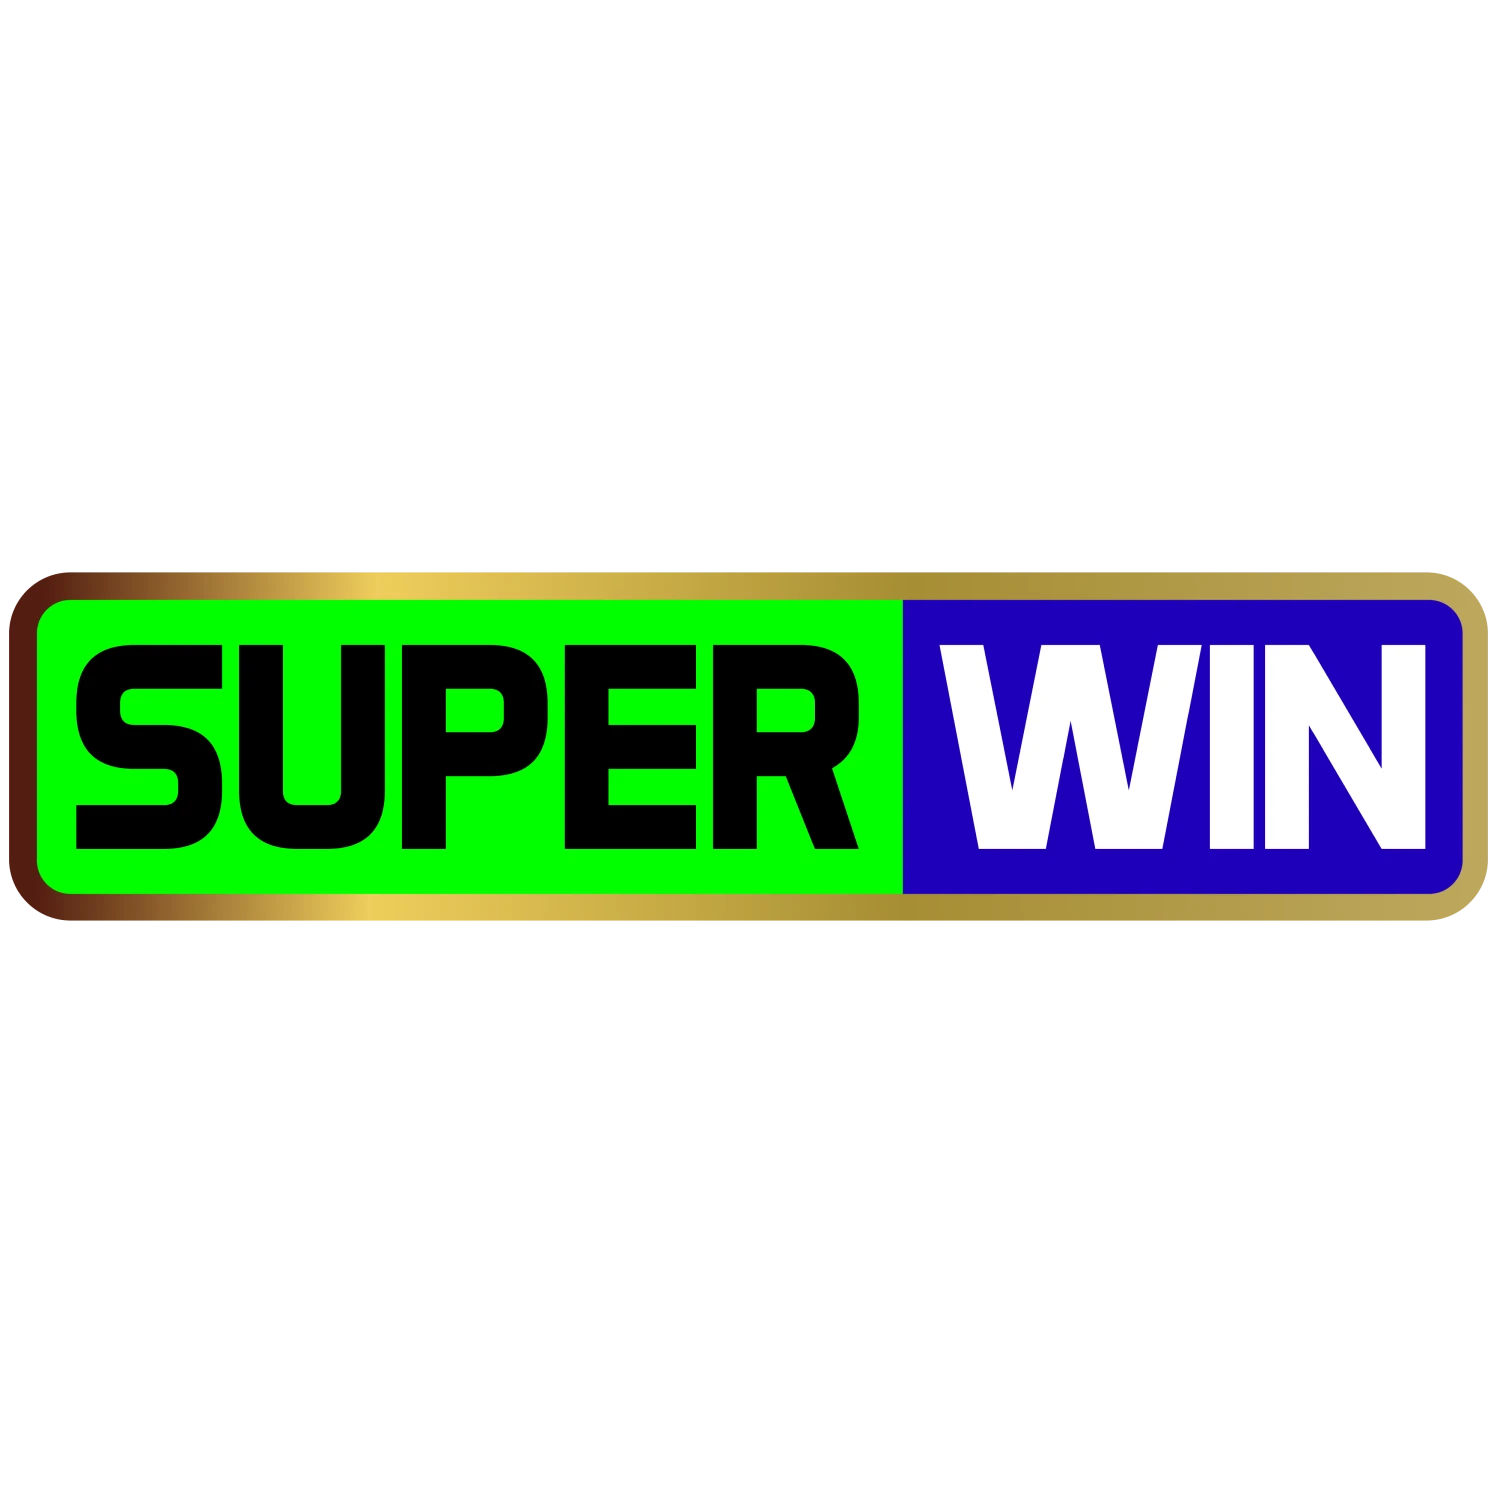 Play at the casino and place your bets with Superwin.